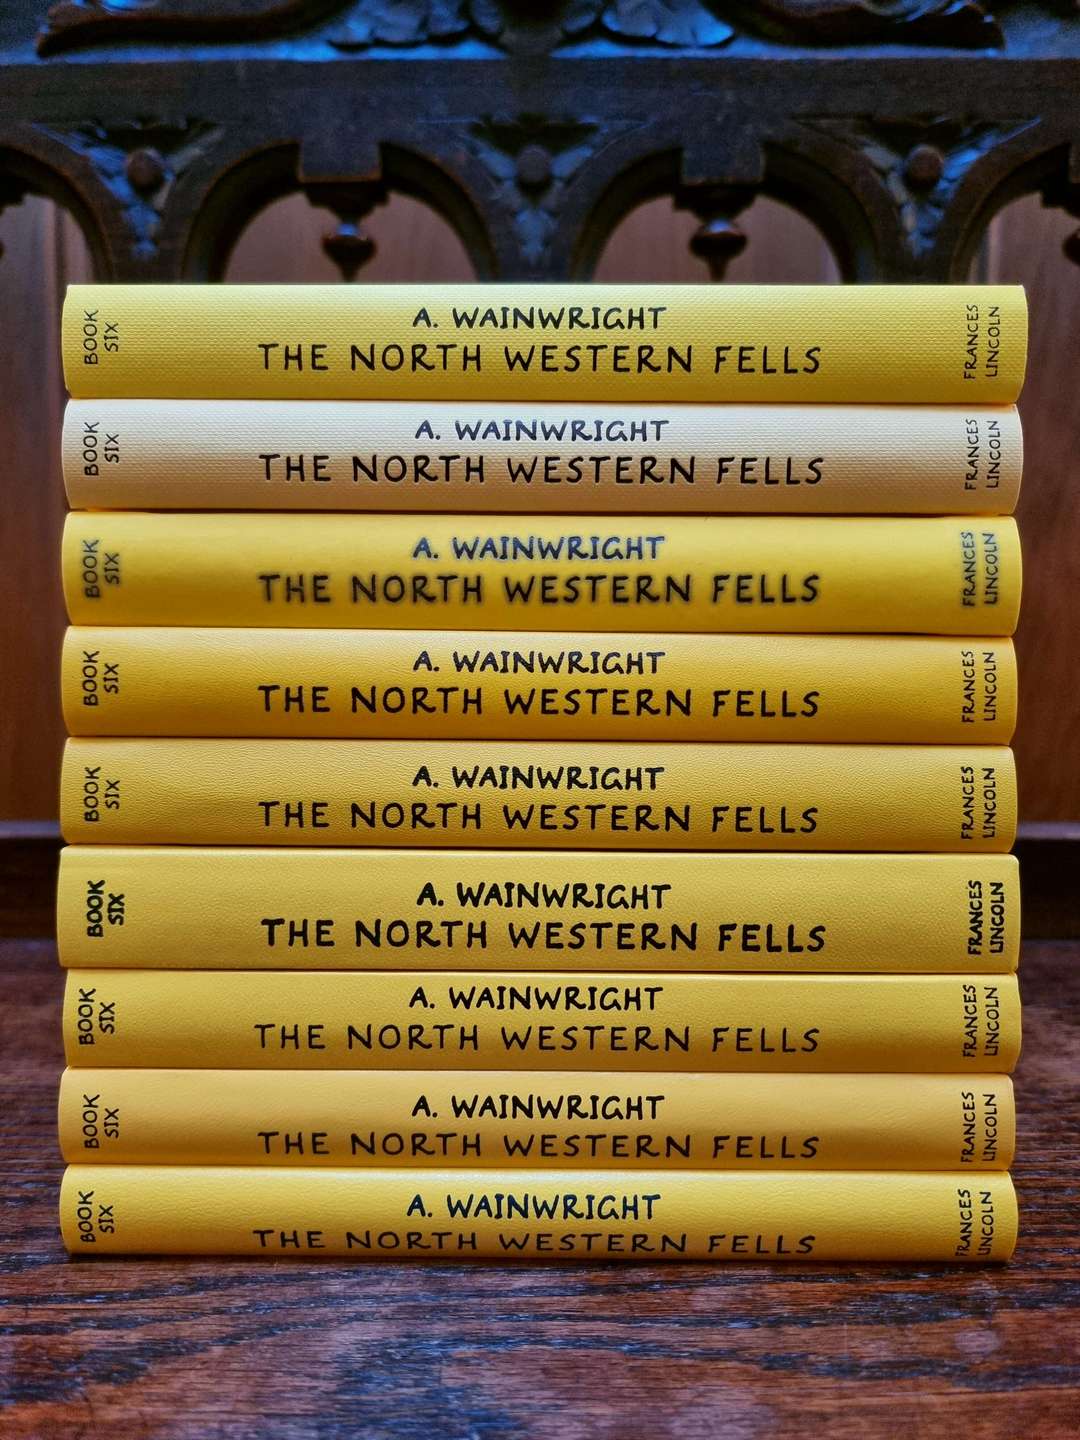 The North Western Fells 50th Anniversary Edition. Various Prints